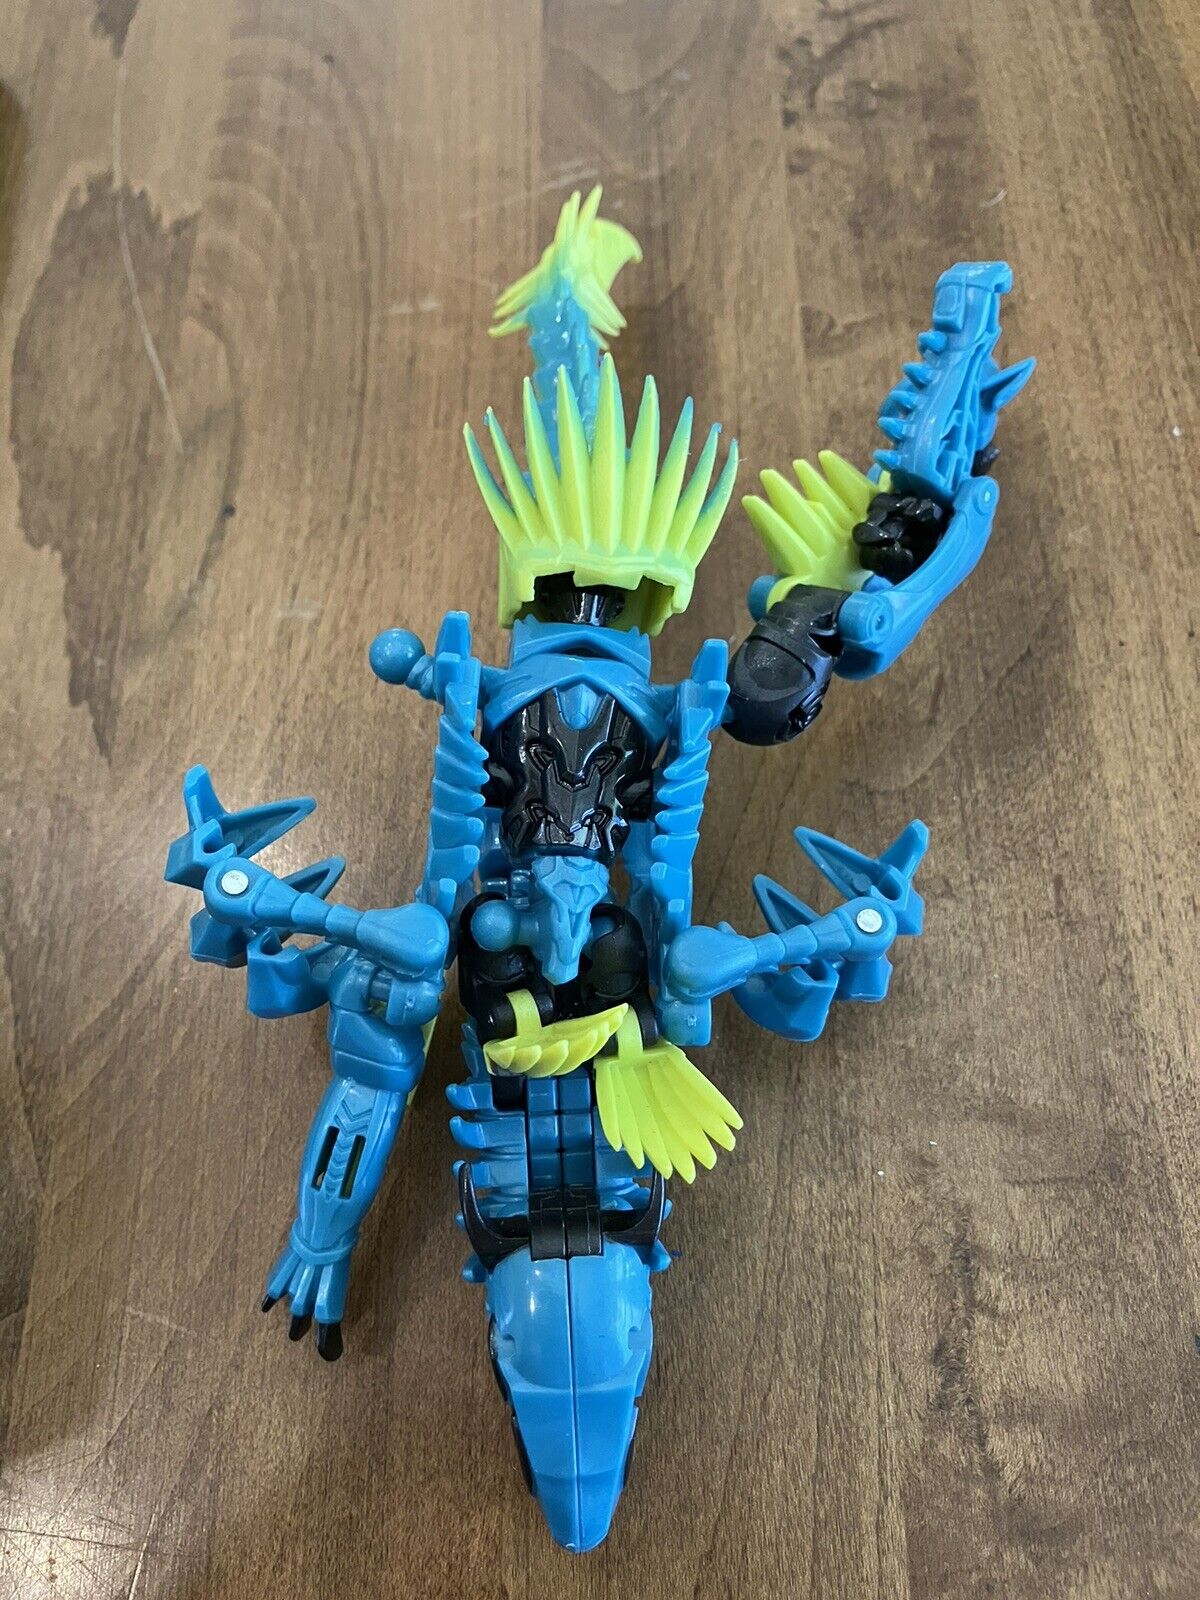 Unbelievable Transformers Age of Extinction Slash Figure Toy Incomplete Loose Free Shipping on eBay